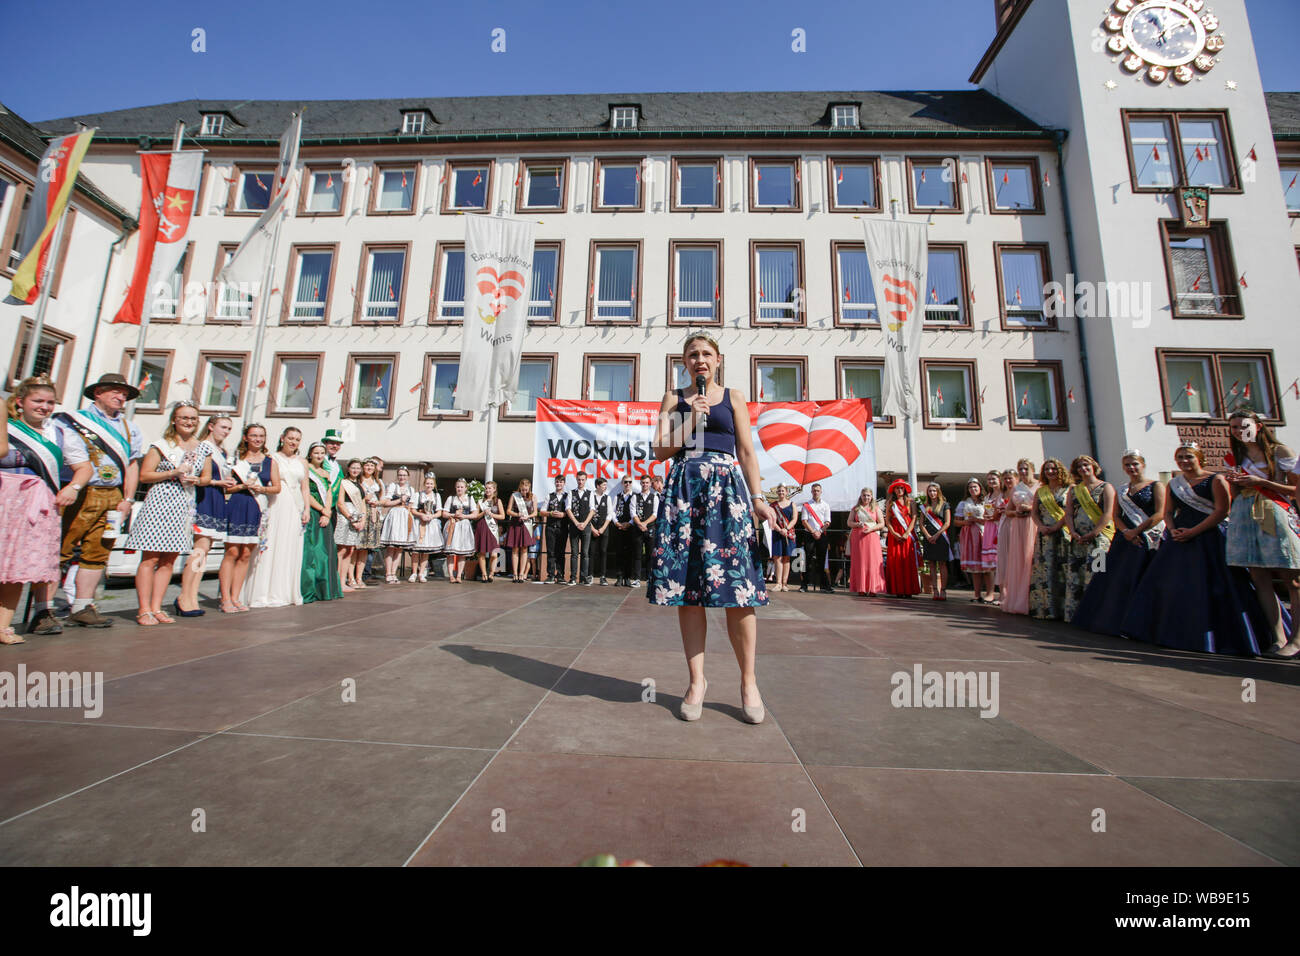 Worms, Germany. 24th August 2019. The Rhine-Hessian wine queen Anna Göhring addresses the opening ceremony of the Backfischfest 2019, surrounded by several local wine majesties from the area around Worms. The largest wine and funfair along the river Rhine, the Backfischfest started in Worms with the traditional handing over of power from the Lord Mayor to the mayor of the fishermen’s lea. The ceremony was framed by dances and music. Stock Photo